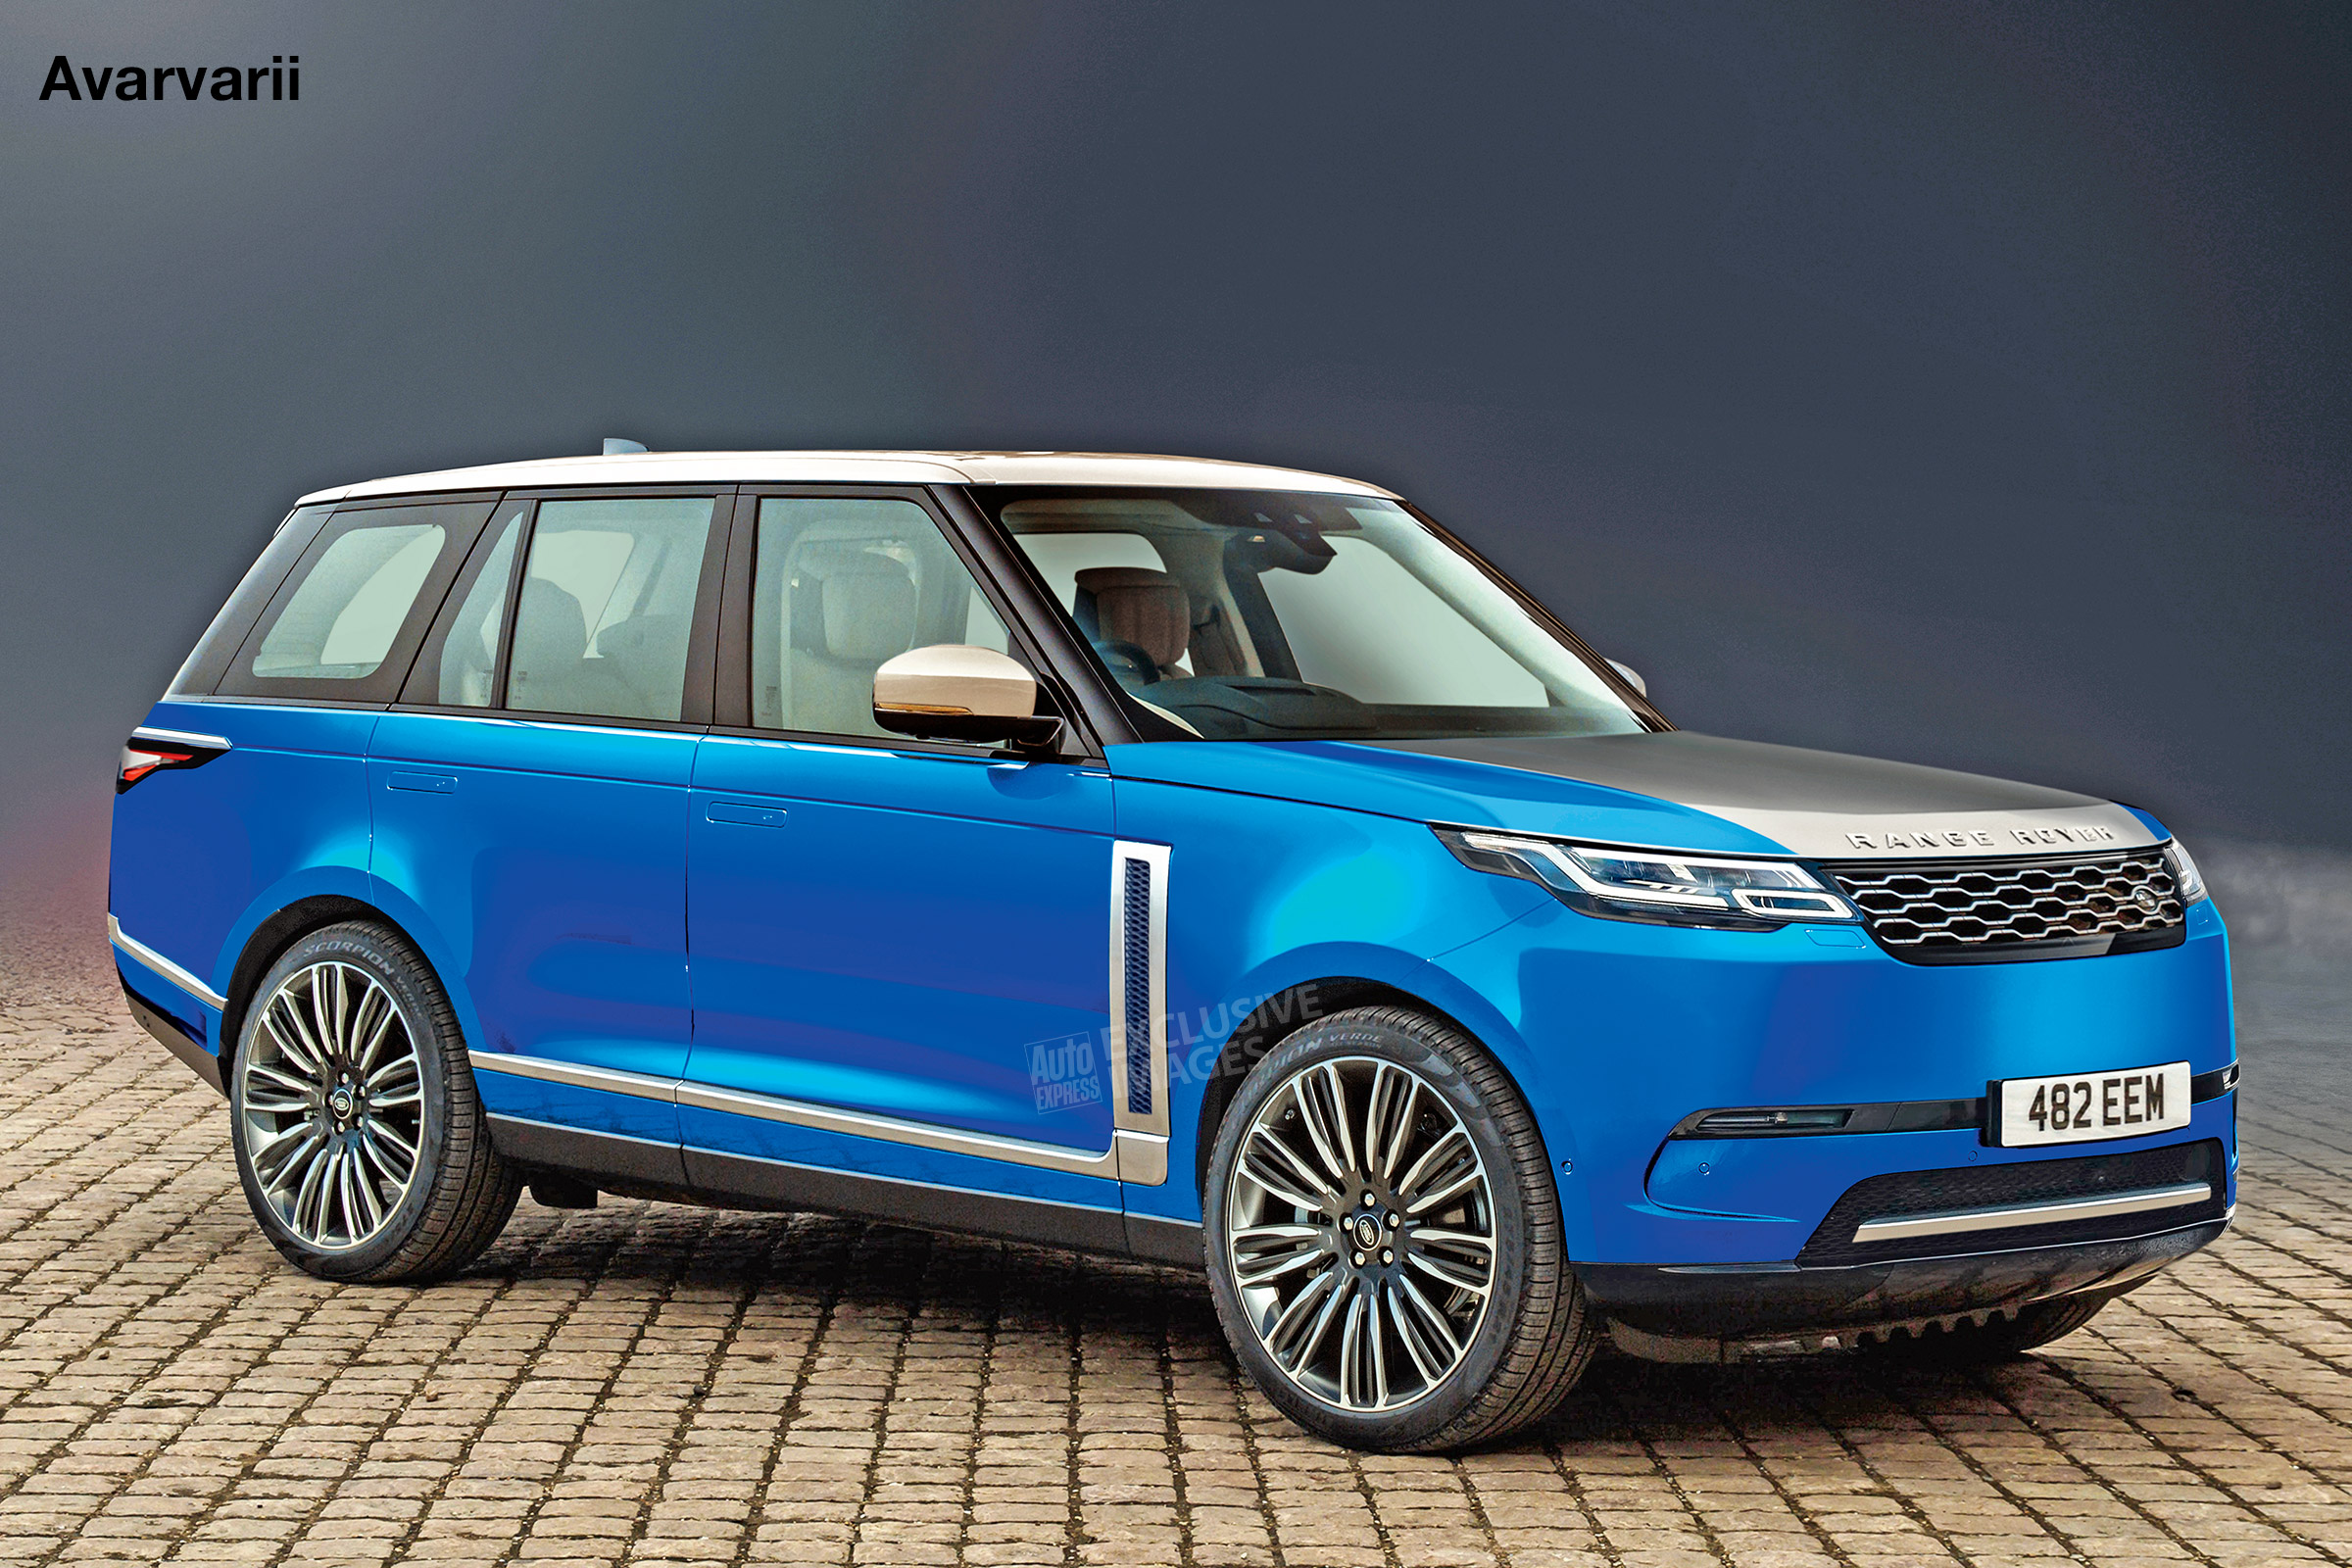 Range Rover Autobiography 2020 Hybrid  . All Derivatives Of Defender Are Available To Order Now.